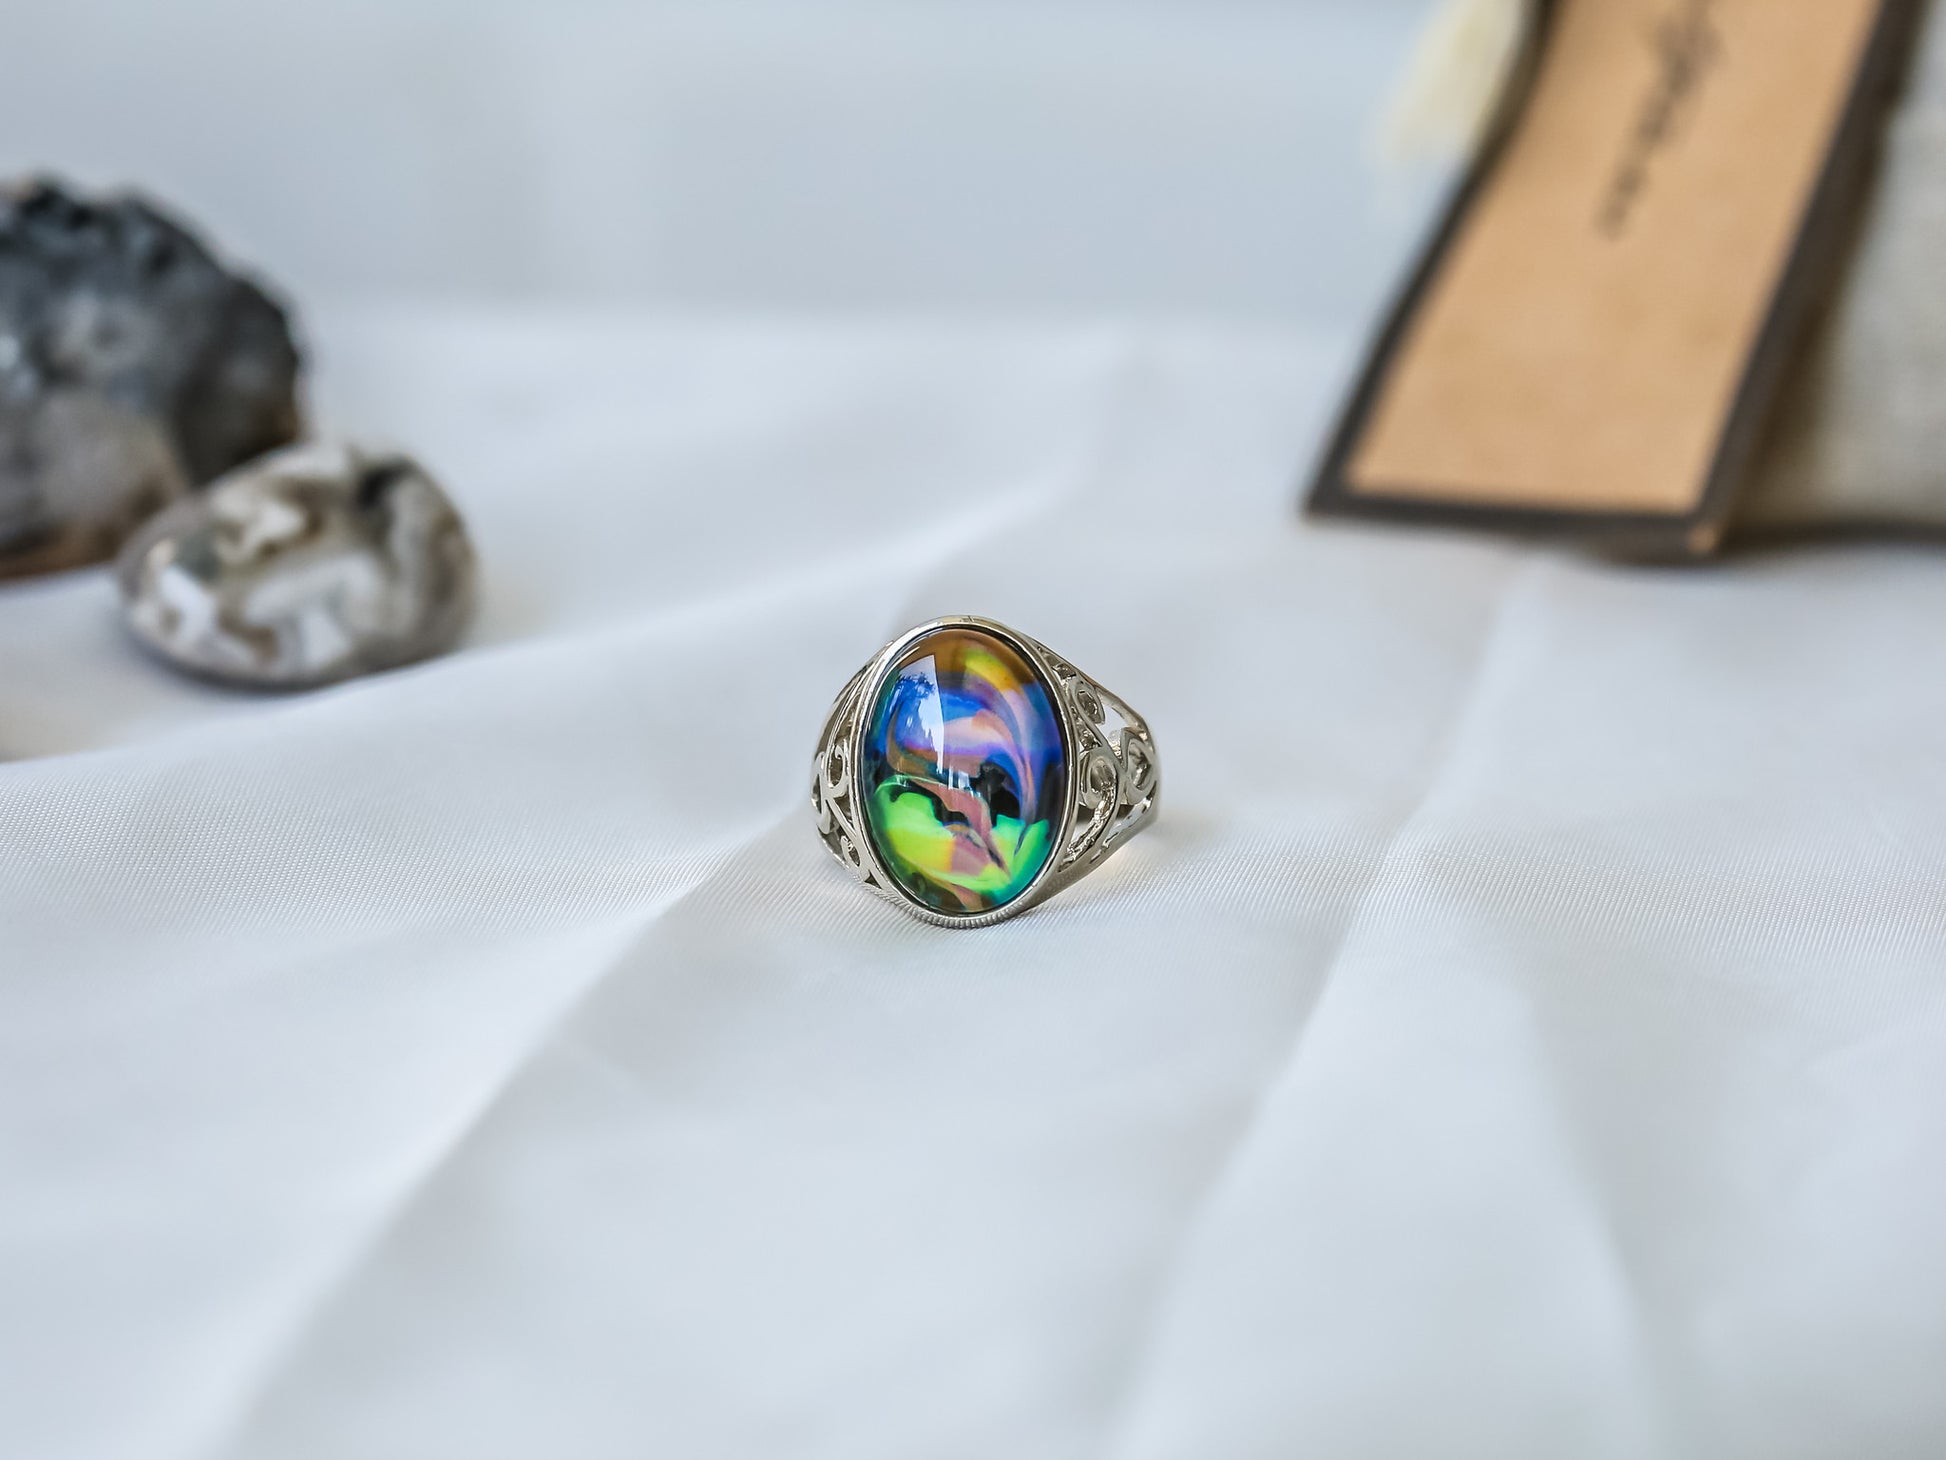 Limited Edition Opalescent Oval Stone Mood Ring.